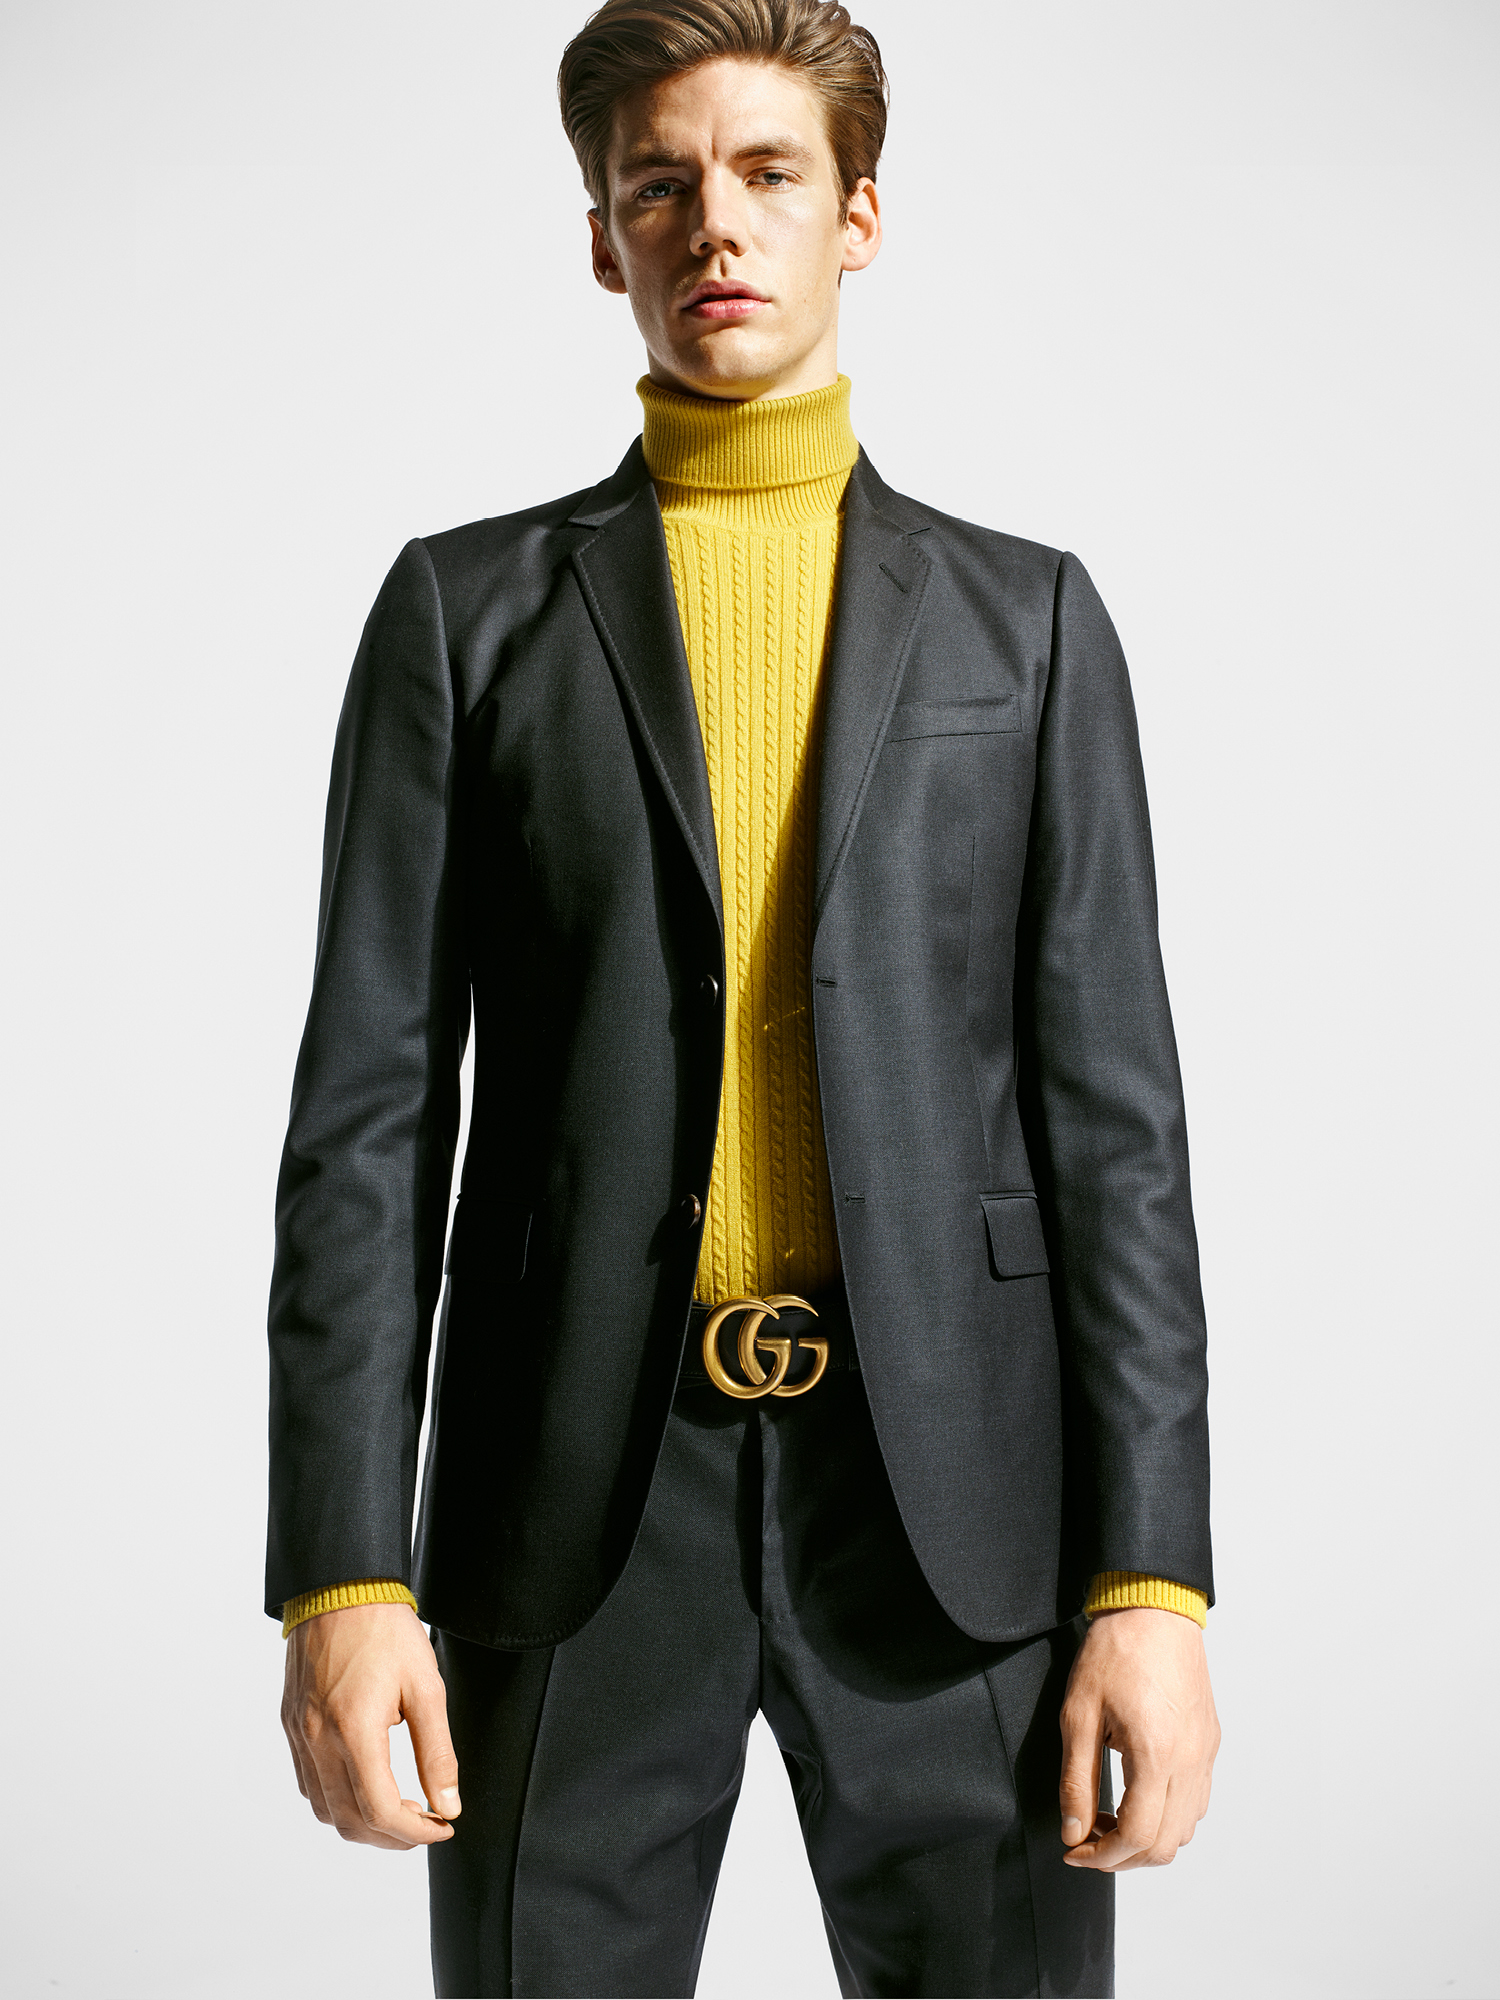 5 Ways x How to style the classic suit by Gucci